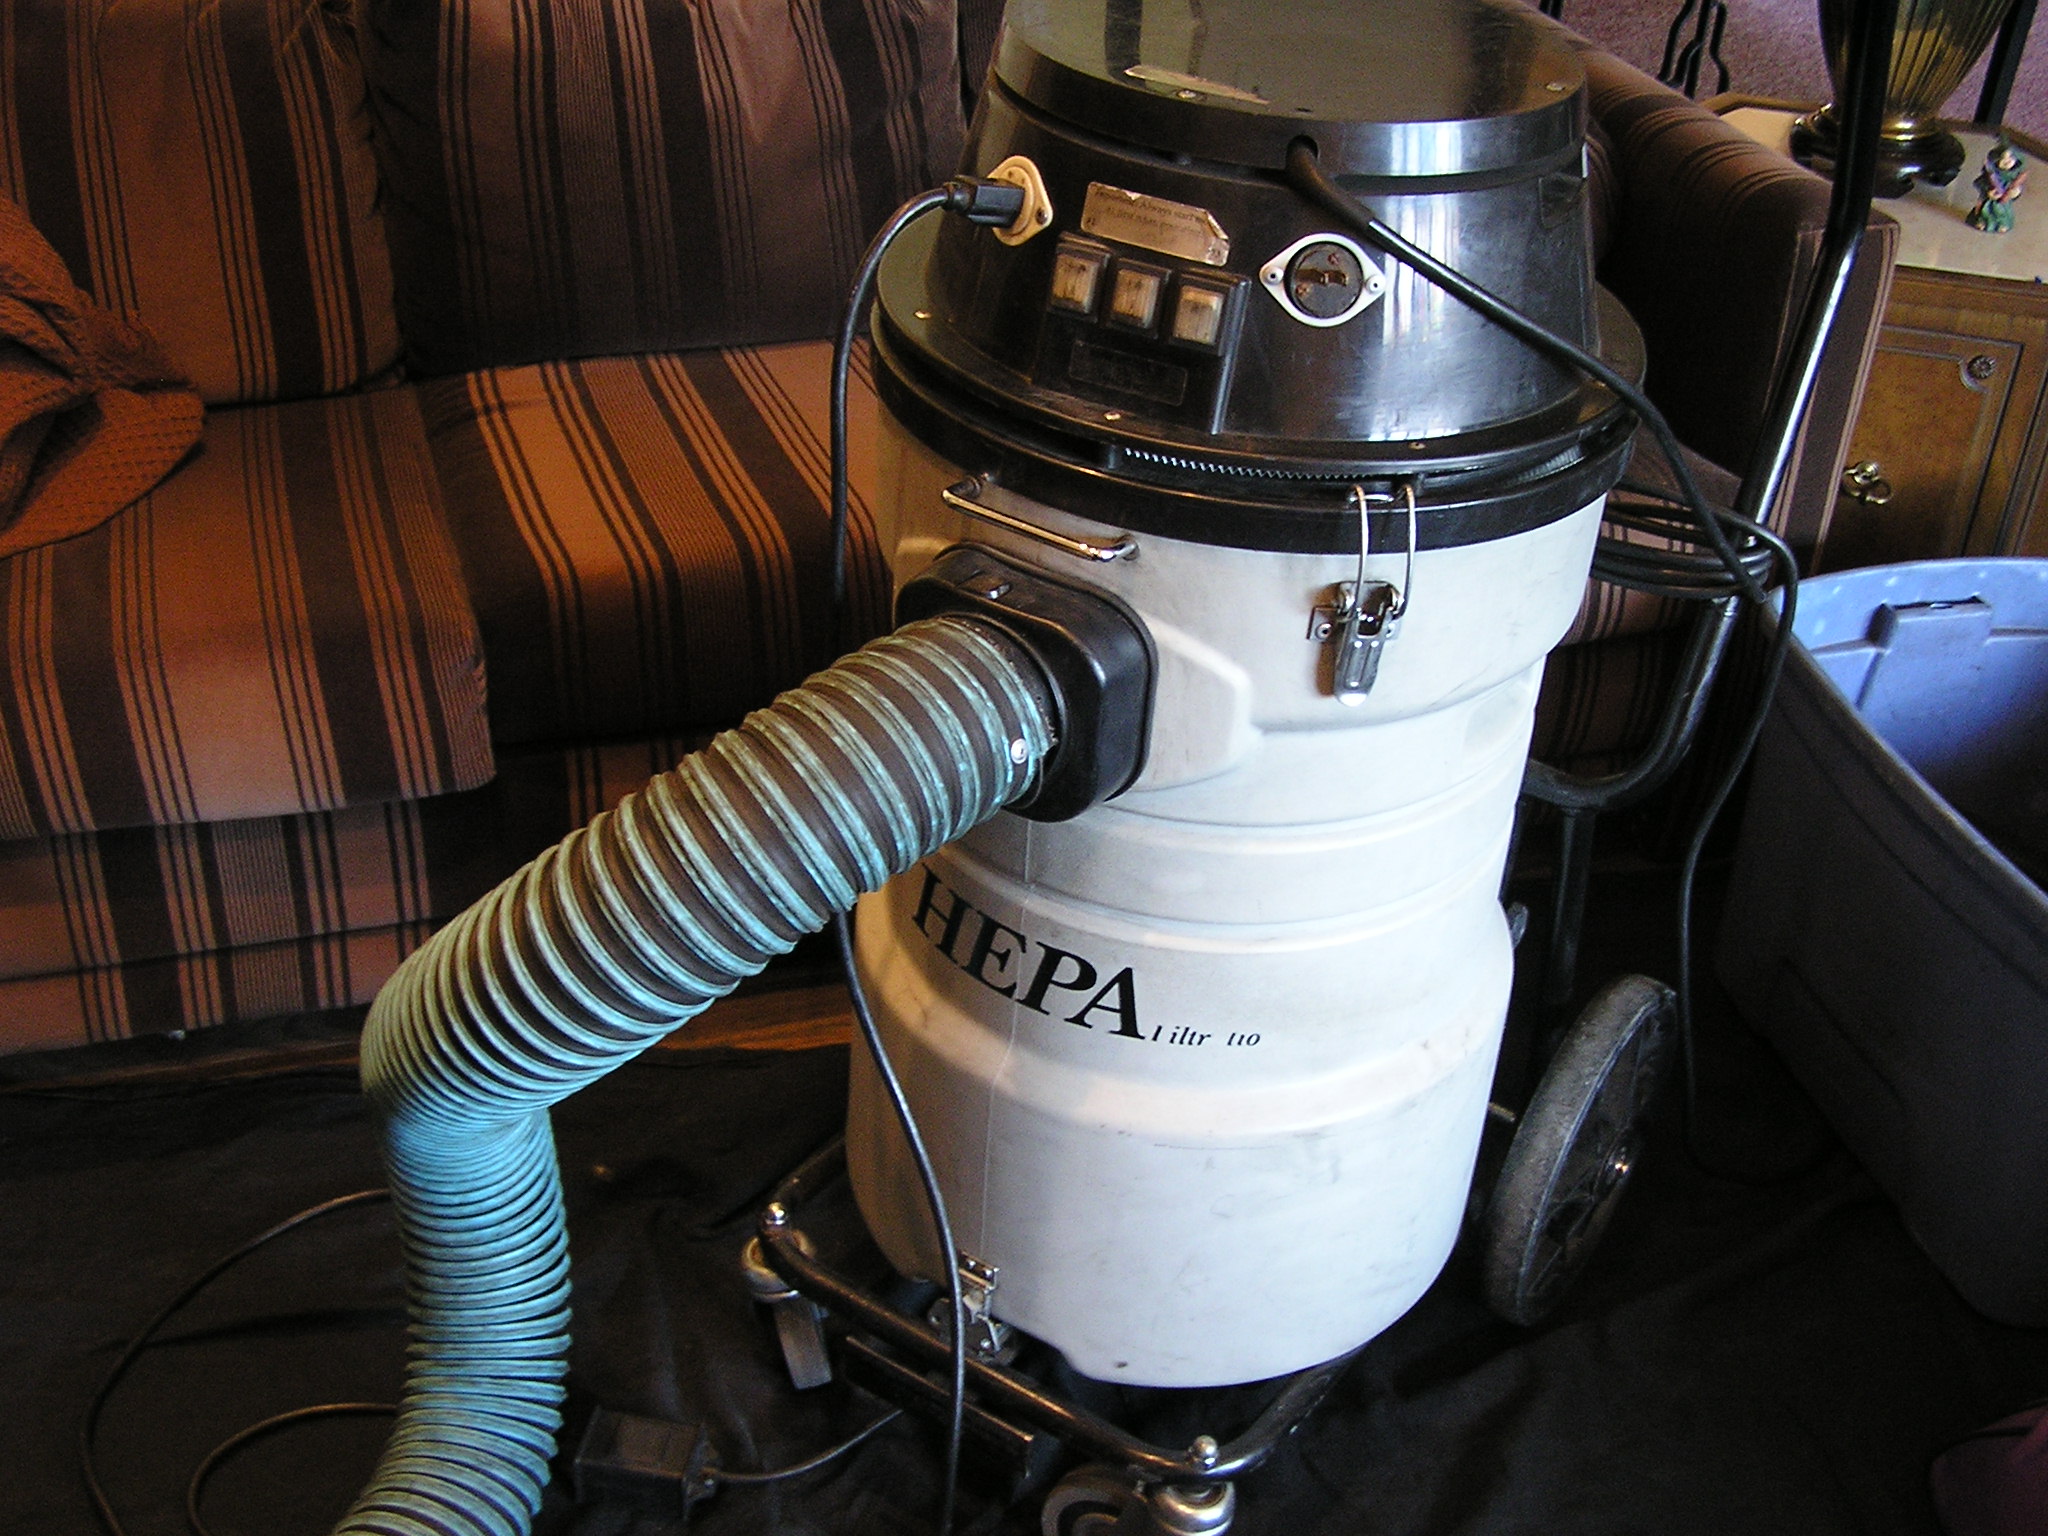 Hepa filer vacuum used during the sweeping process.  Equipped with three speed variable motor to enable us to collect all debris during the cleaning process.